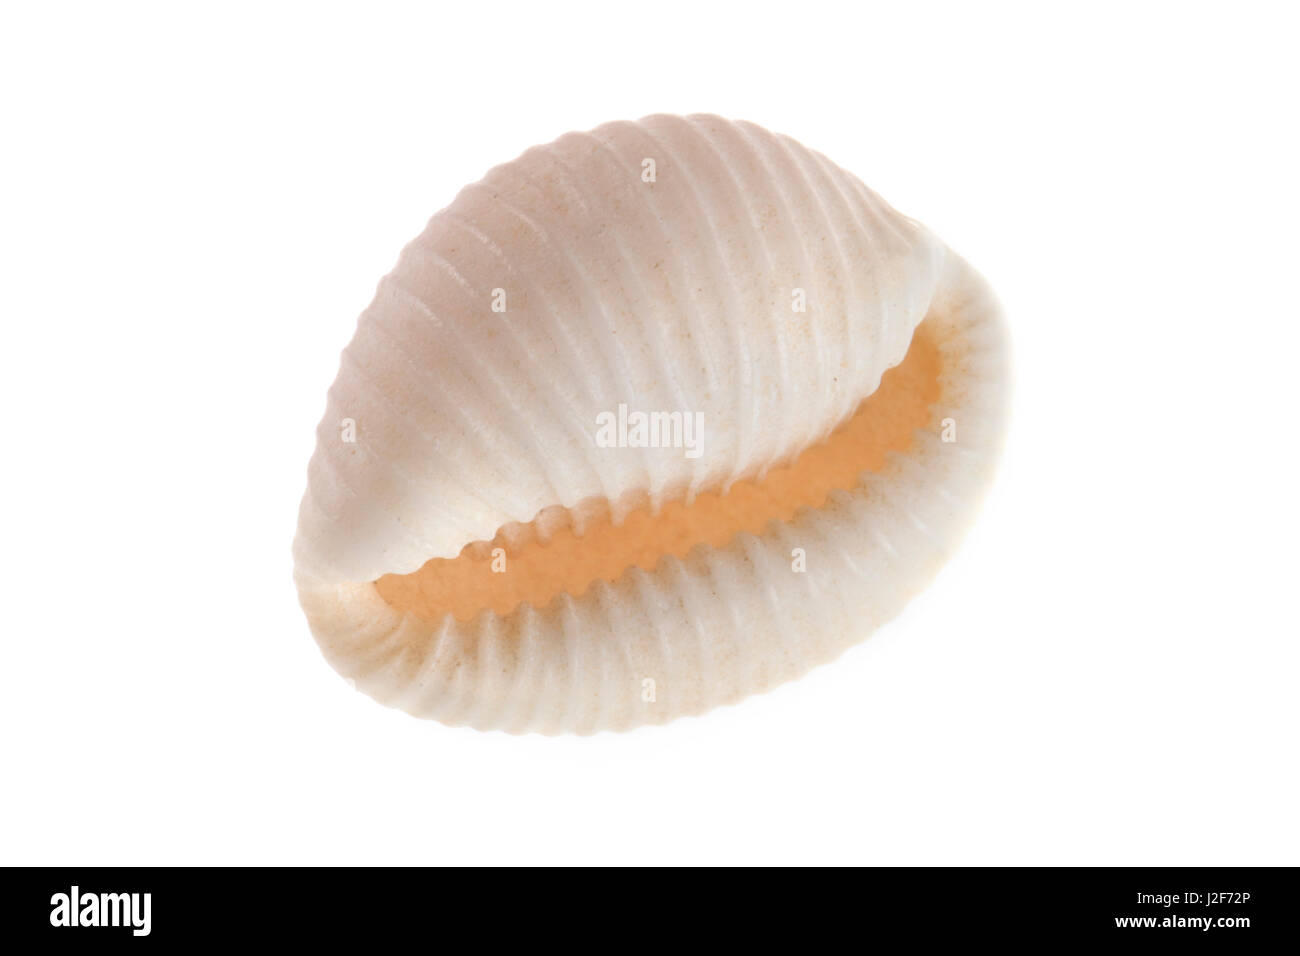 northern cowrie against a white background Stock Photo